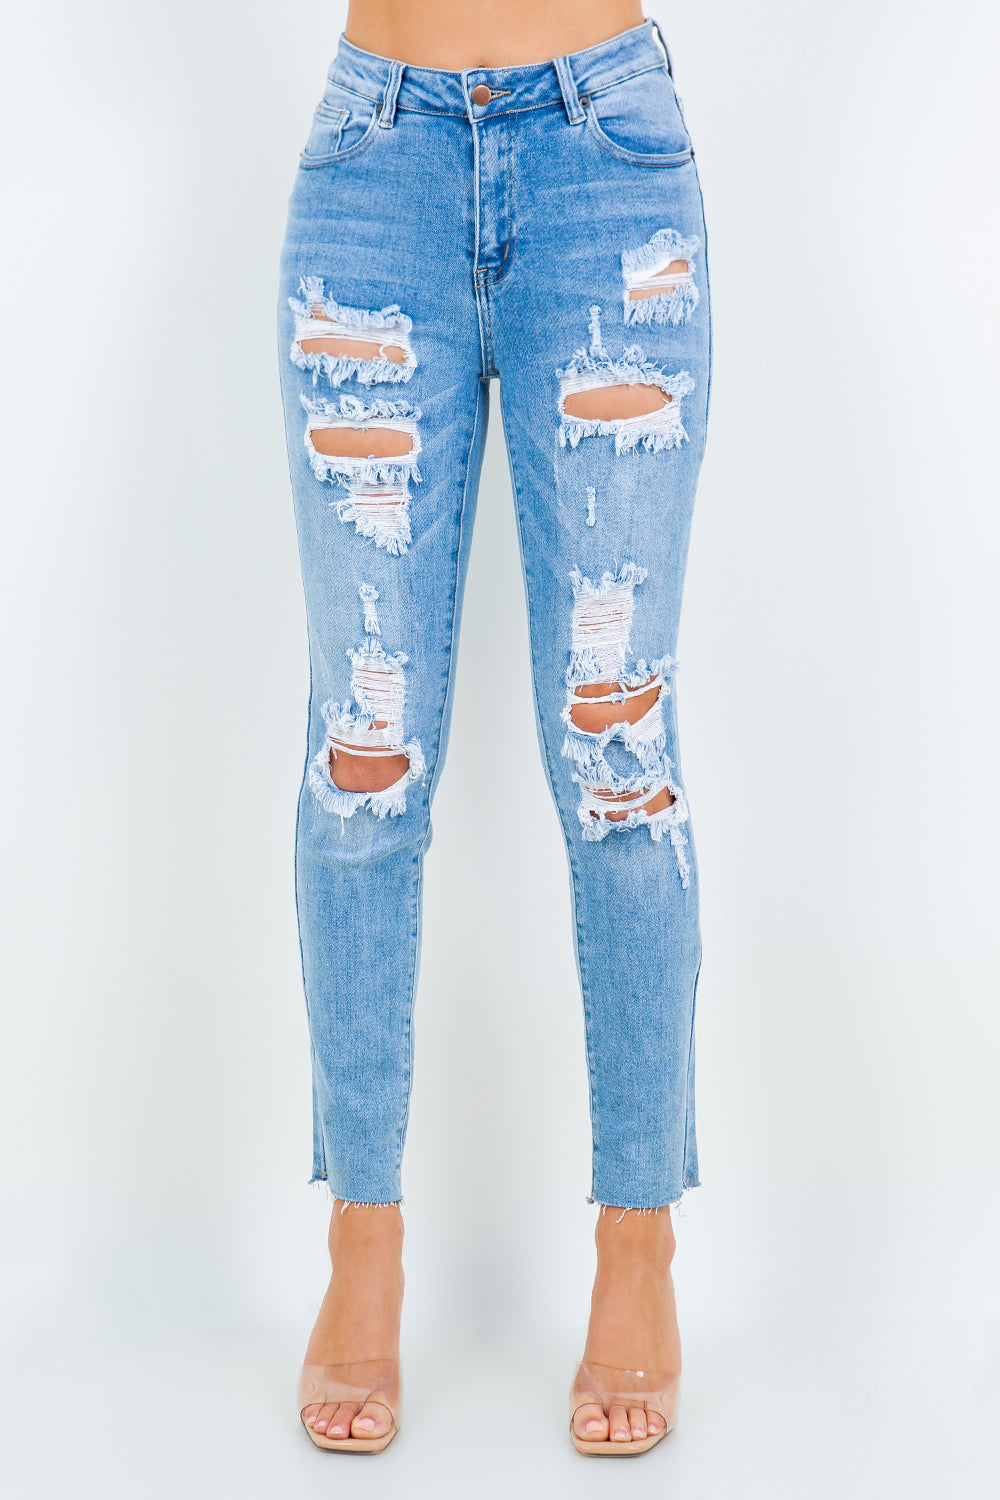 American Bazi High Waist Destroyed Jeans